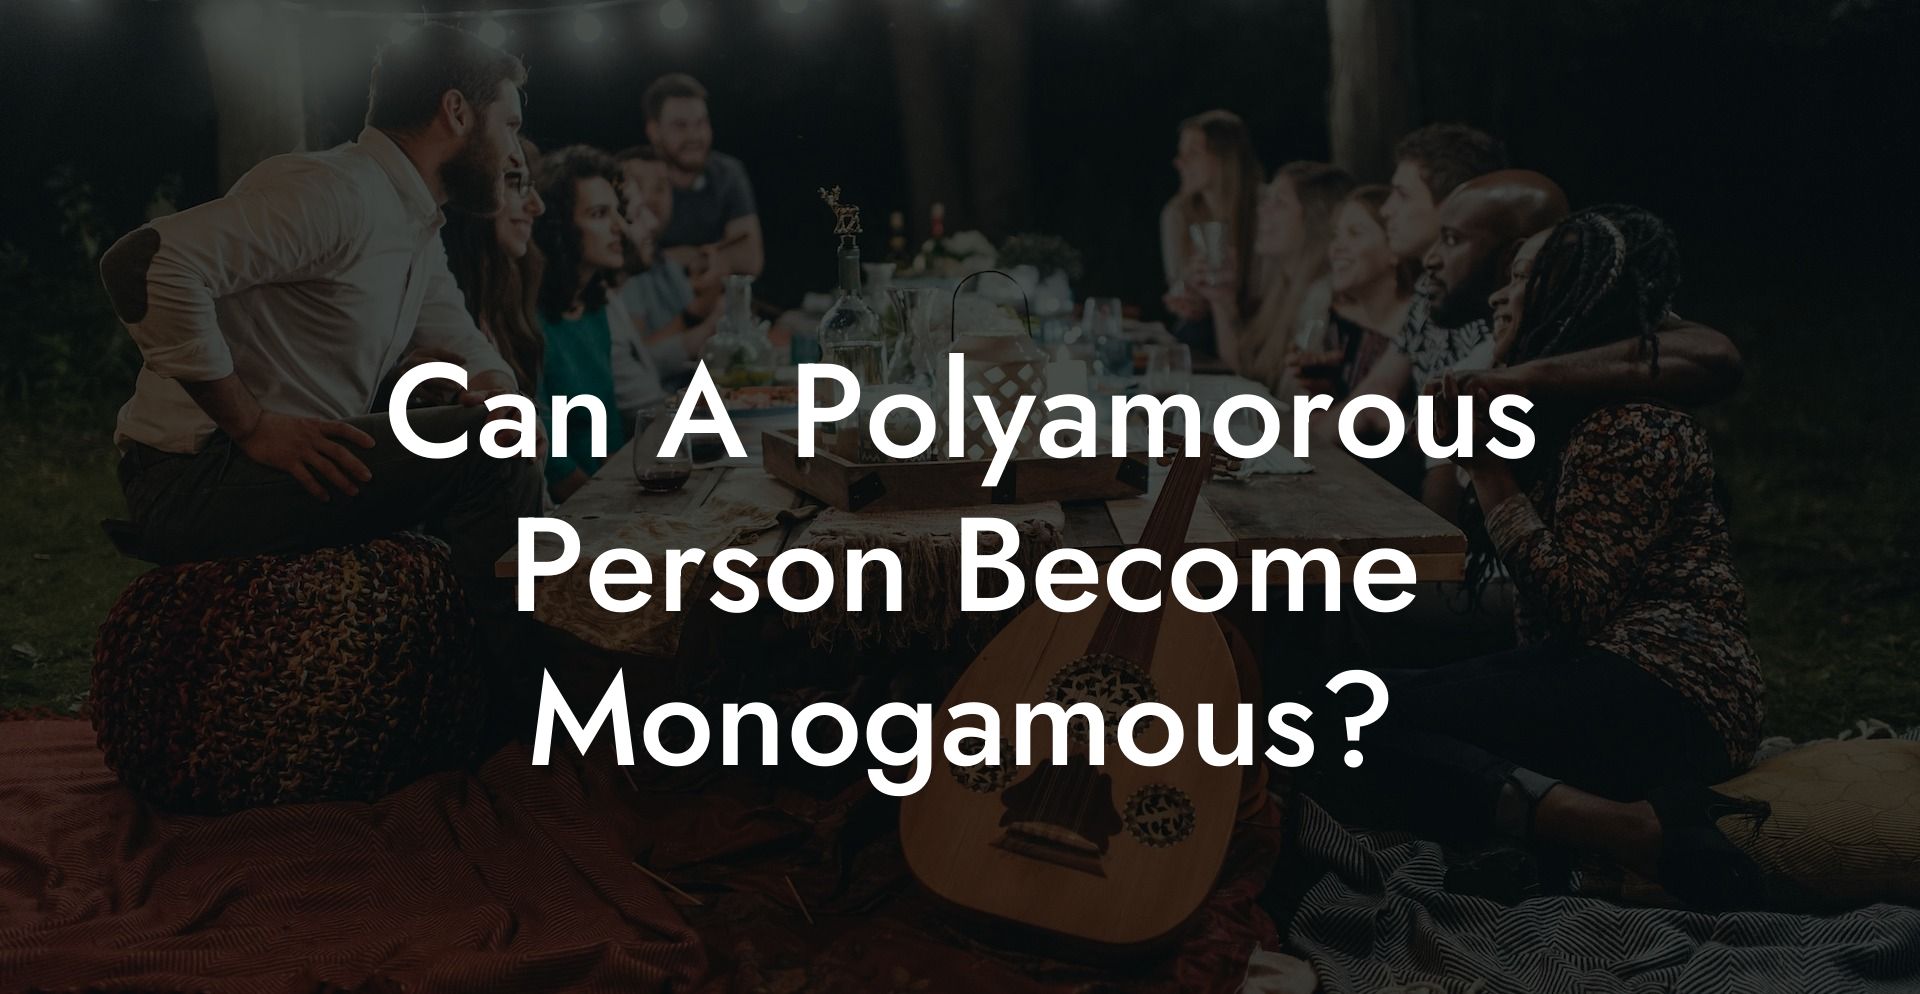 Can A Polyamorous Person Become Monogamous?